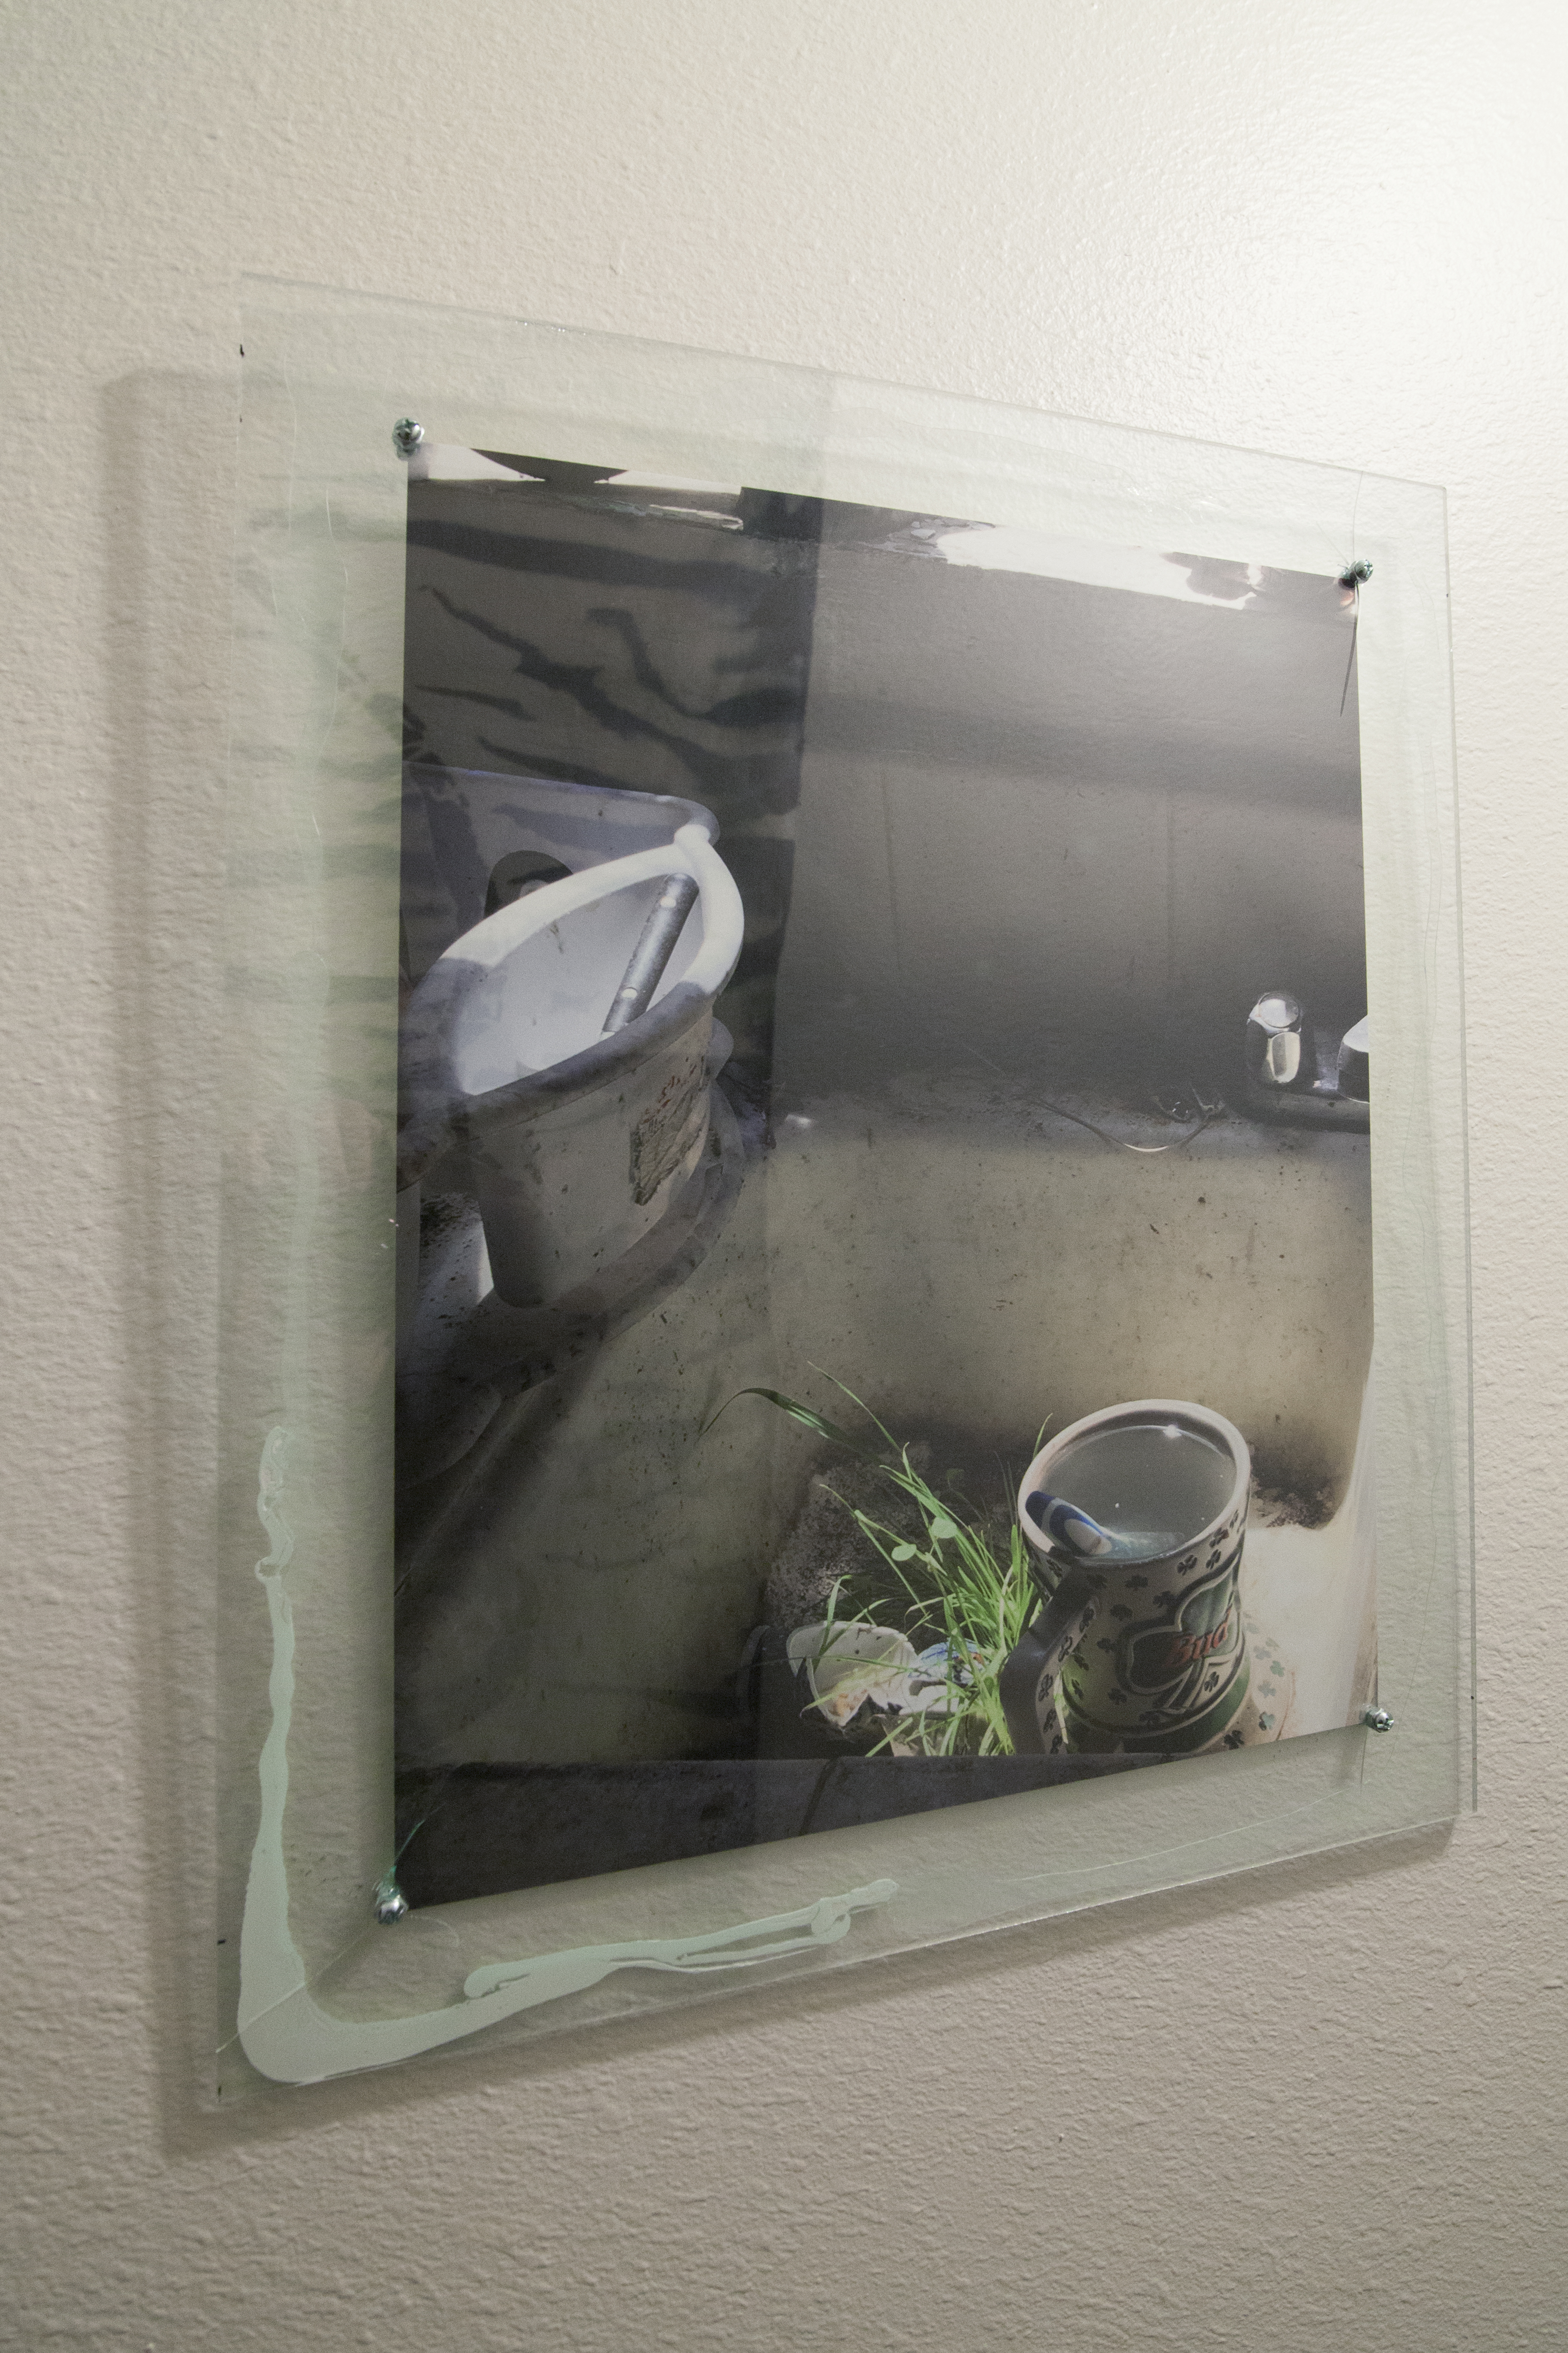 Photo print of a sink with a plant growing out of the drain hung on a white wall